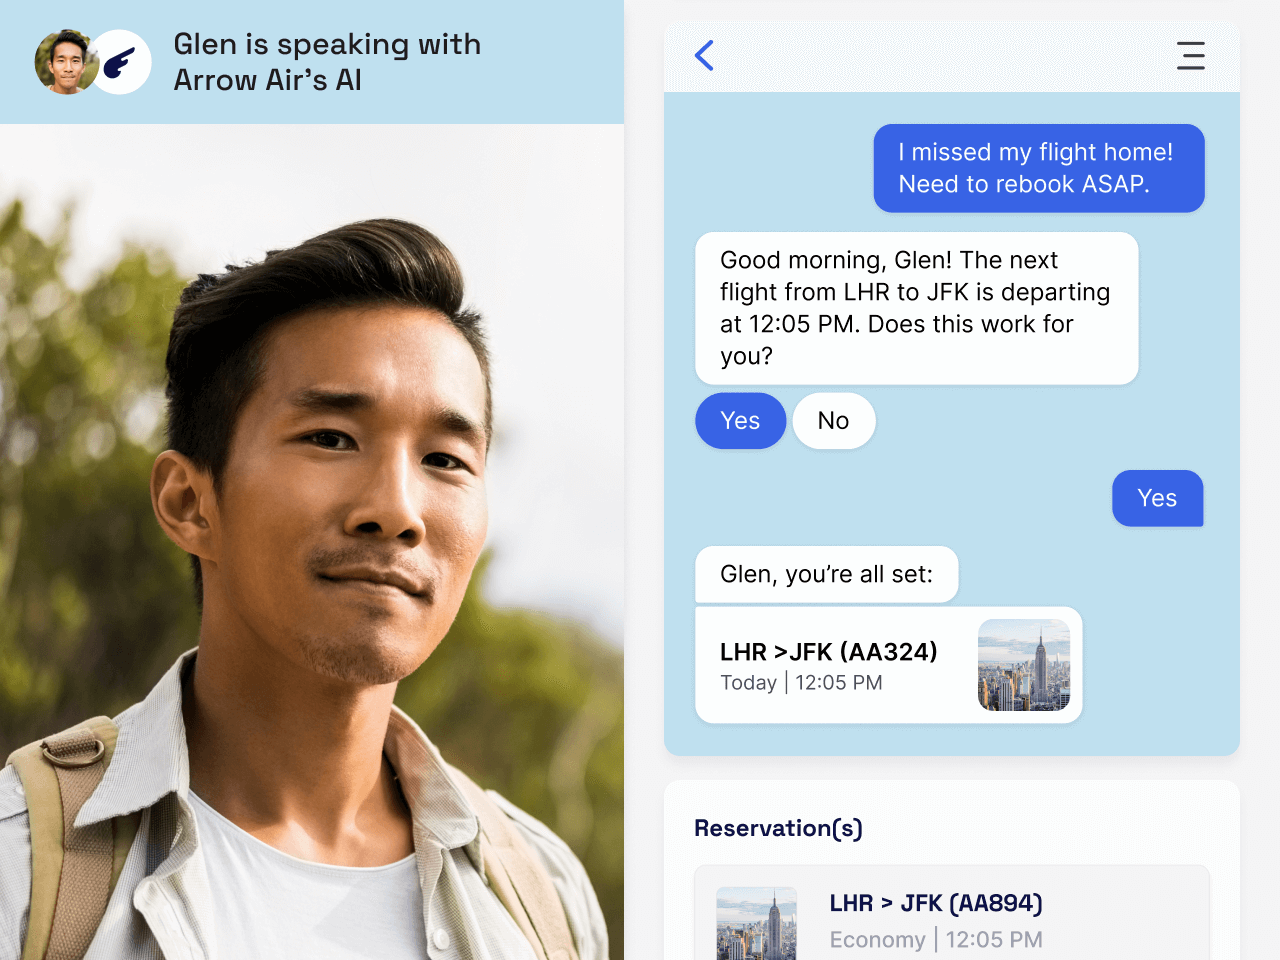 messaging example of how an AI-powered travel contact center streamlines a missed flight and rebooking